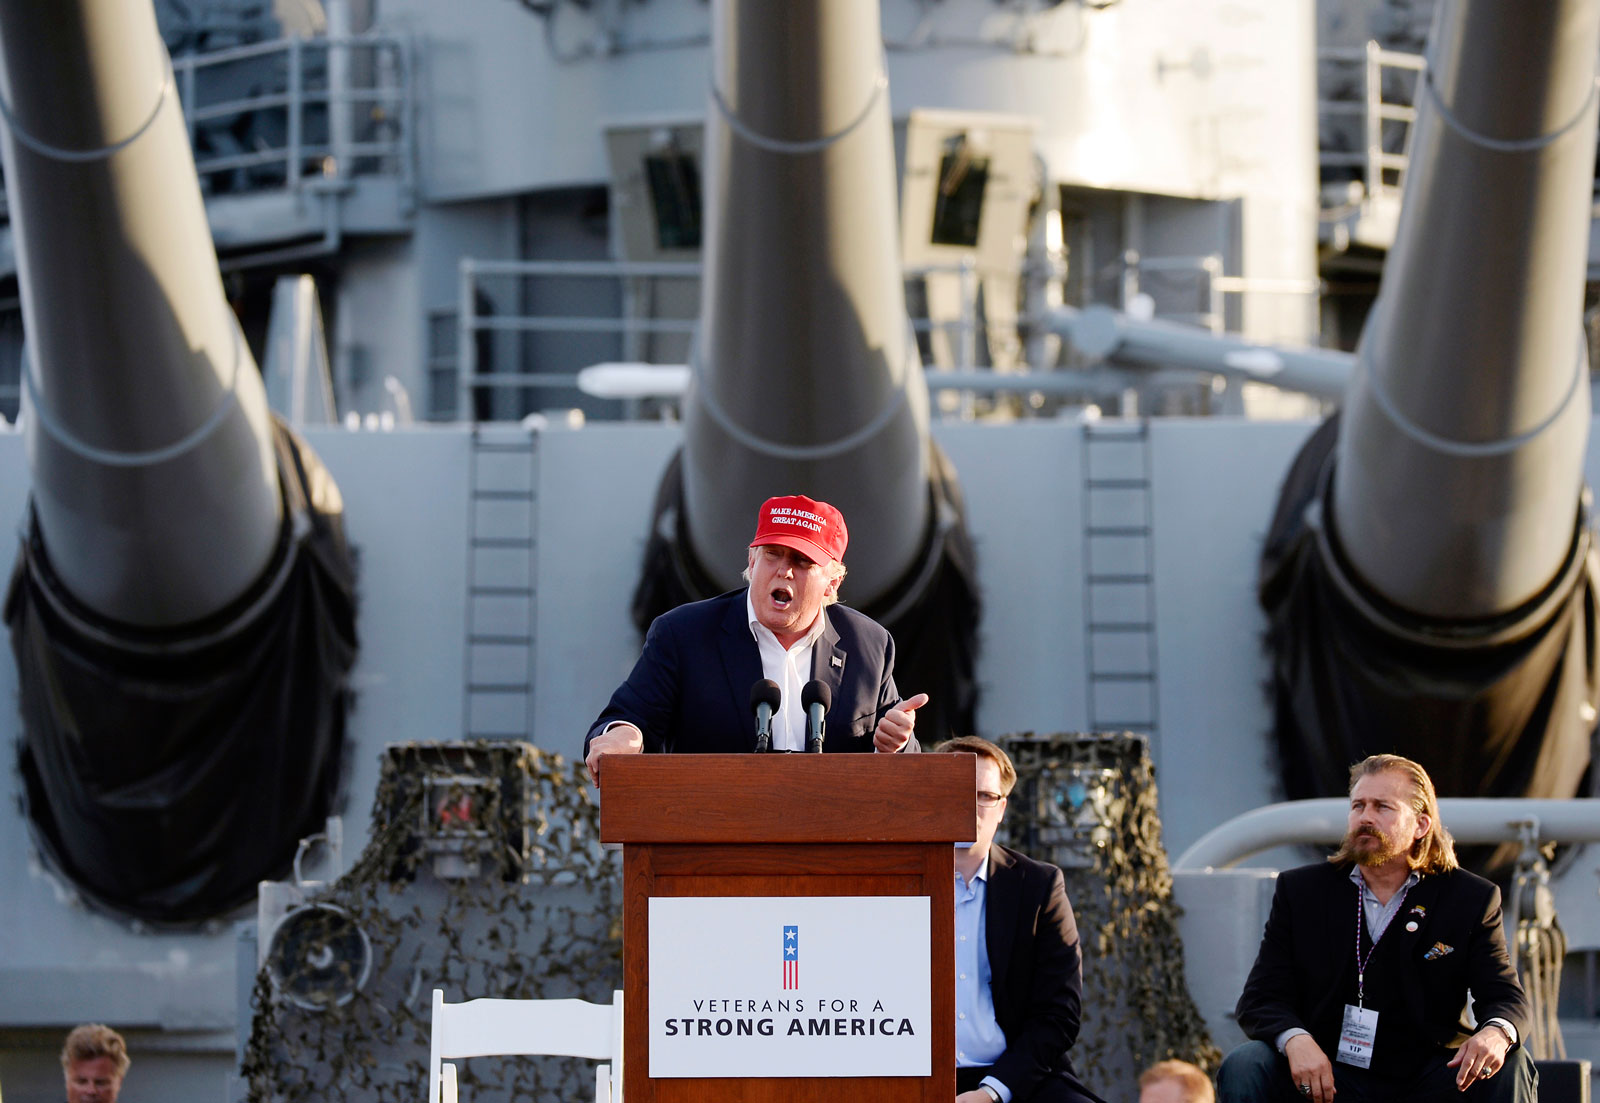 Donald Trump at a campaign event aboard the retired ship USS Iowa, Los Angeles, September 15, 2015